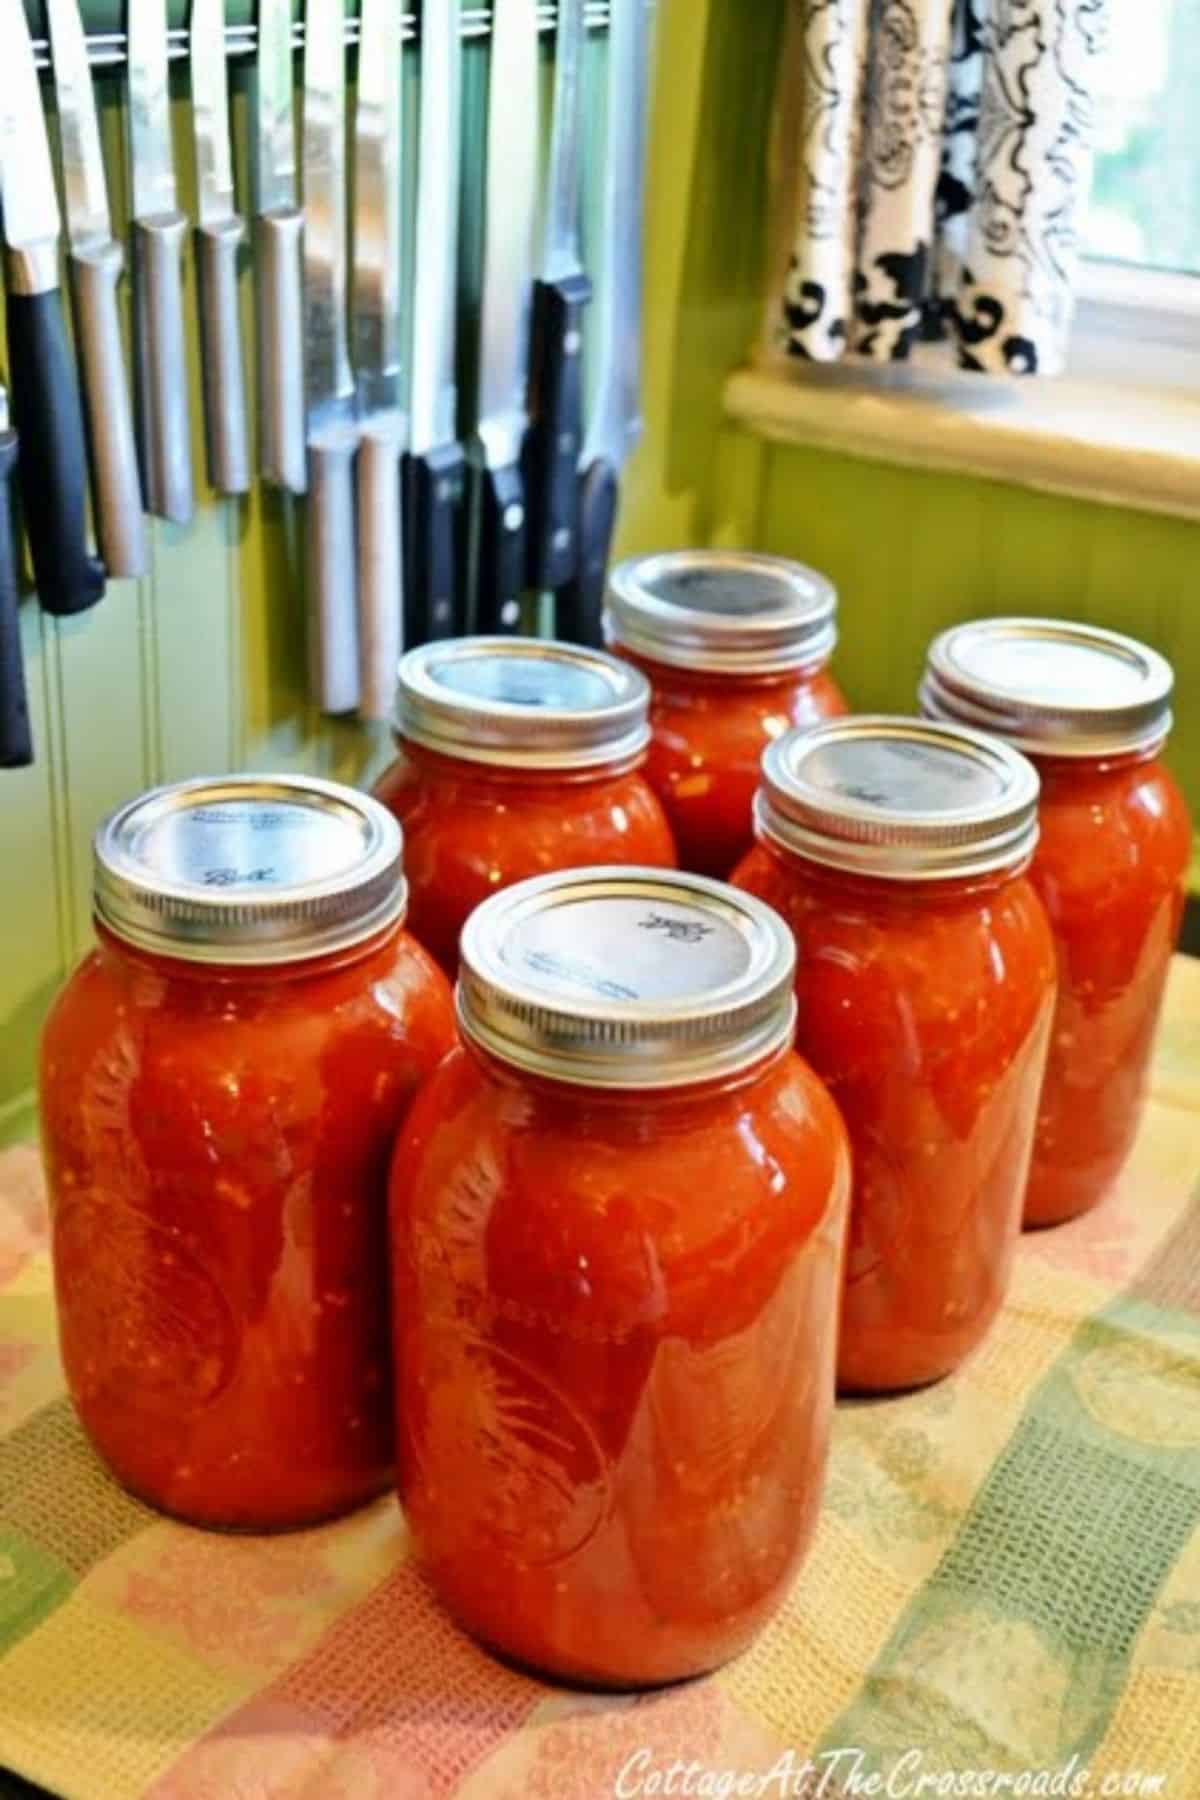 Homemade canned spaghetti sauce in glass jars.